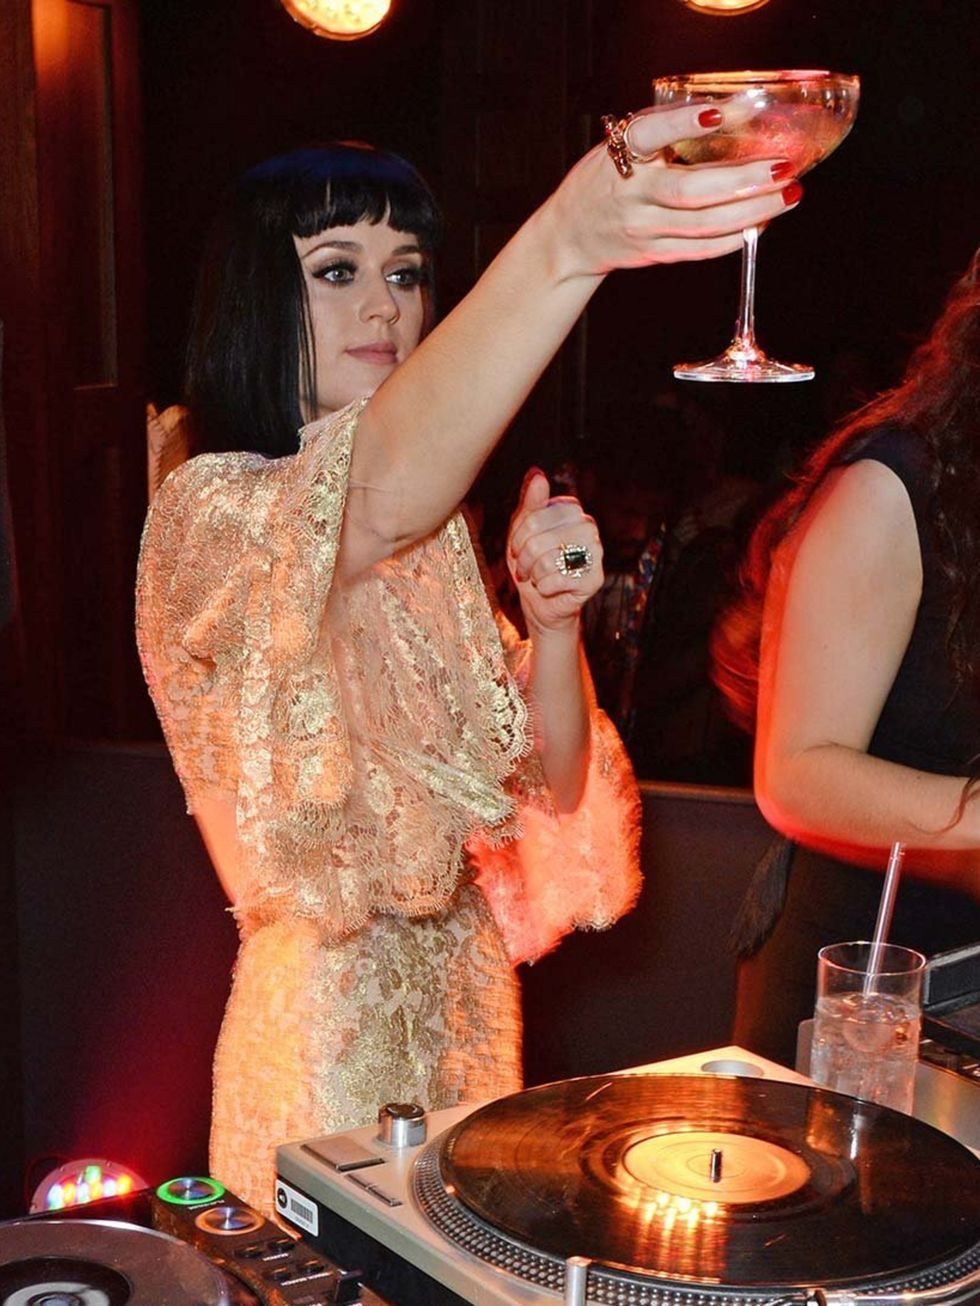 <p><a href="http://www.elleuk.com/elle-tv/cover-stars/elle-magazine/katy-perry-elle-behind-the-cover-video">Katy Perry</a>, in Dolce & Gabbana, at the BRITs 2014 after-party at the Soho House pop up.</p><p><a href="http://www.elleuk.com/elle-tv/cover-star